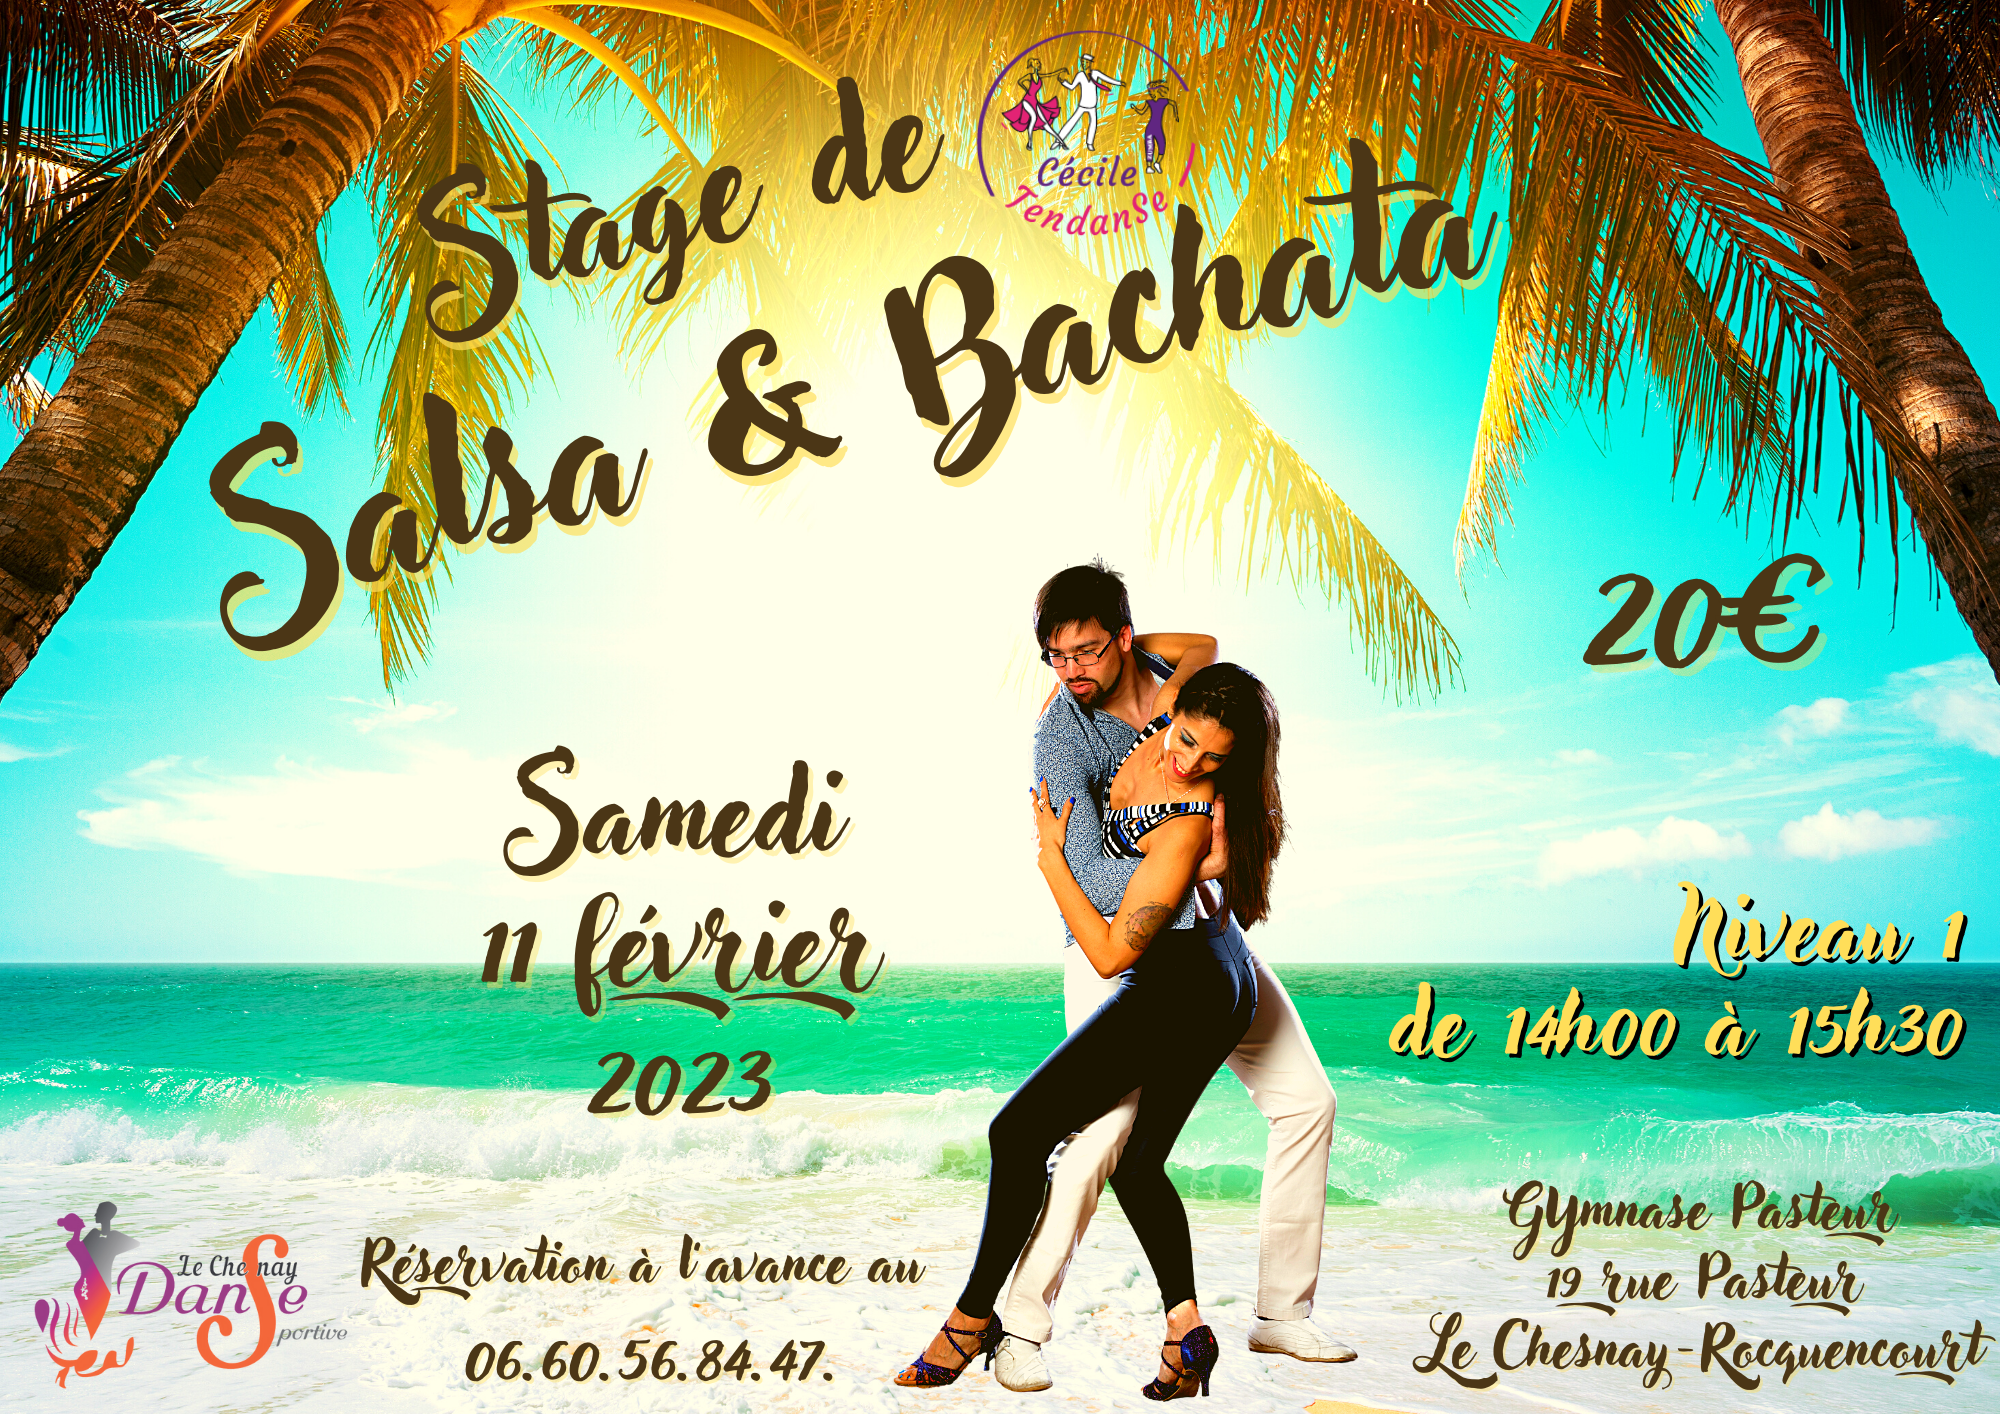 You are currently viewing SALSA & BACHATA DÉBUTANTS – 11 FÉVRIER 2023